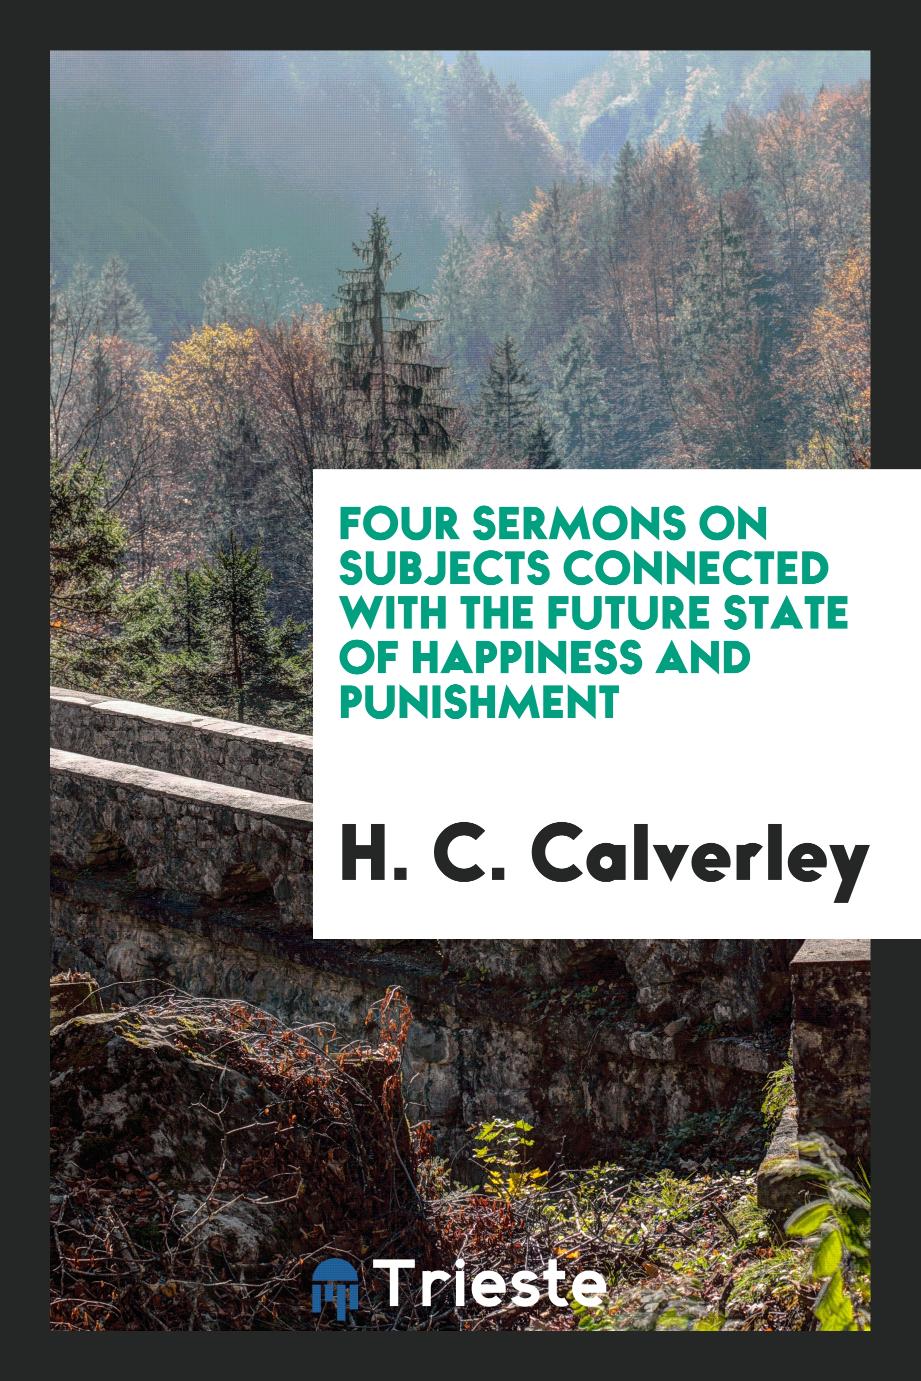 Four sermons on subjects connected with the future state of happiness and punishment